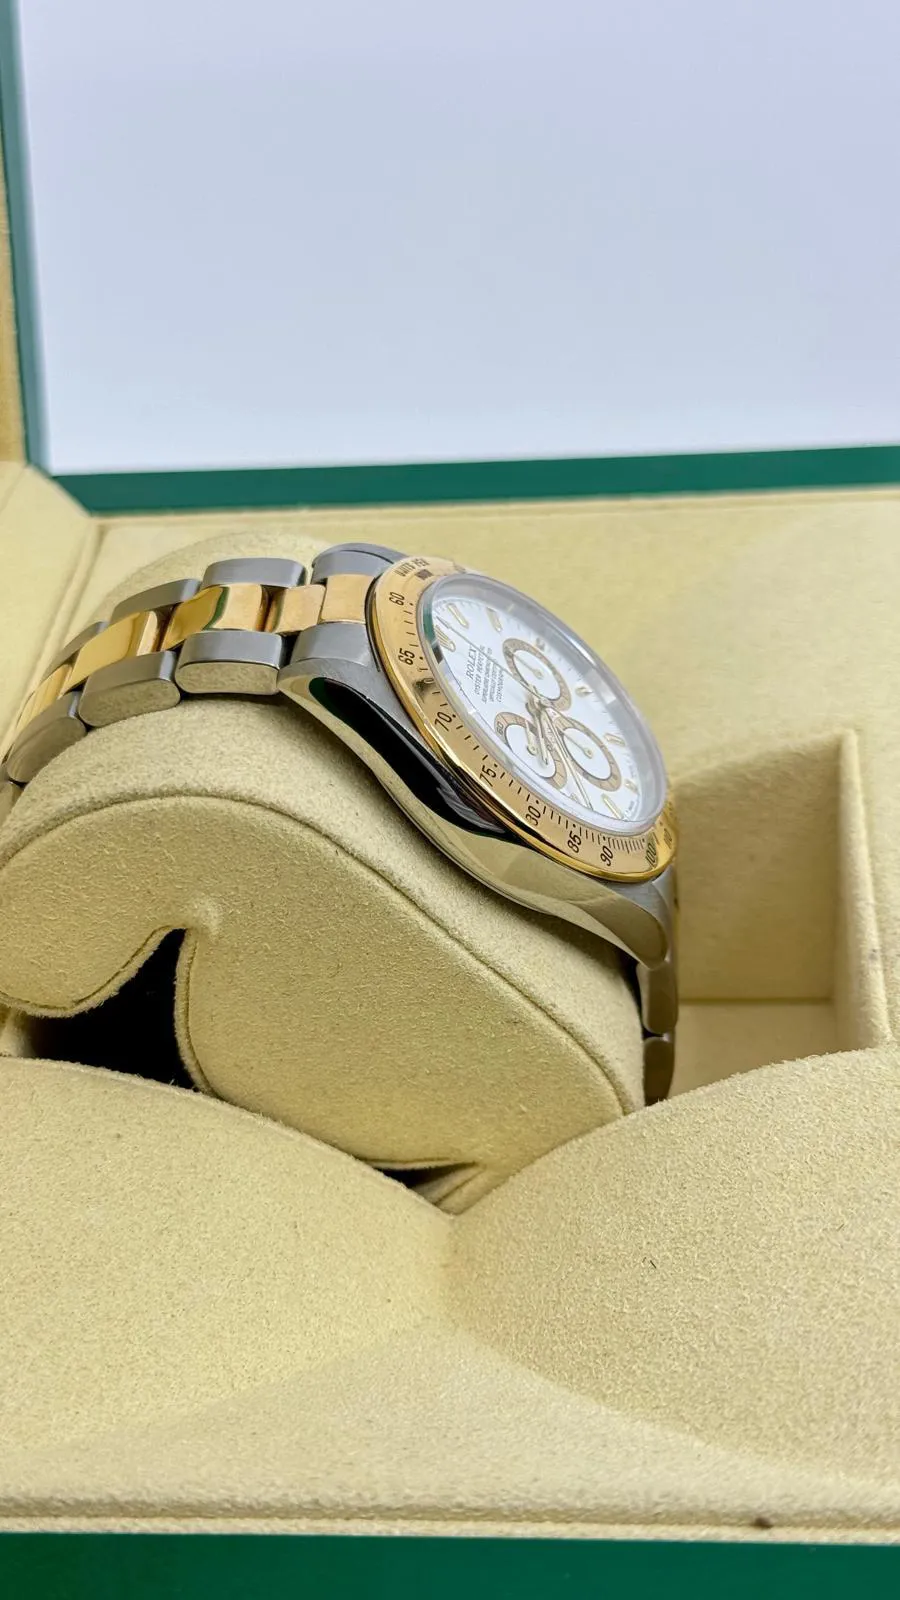 Rolex Daytona 16523 40mm Yellow gold and stainless steel 2